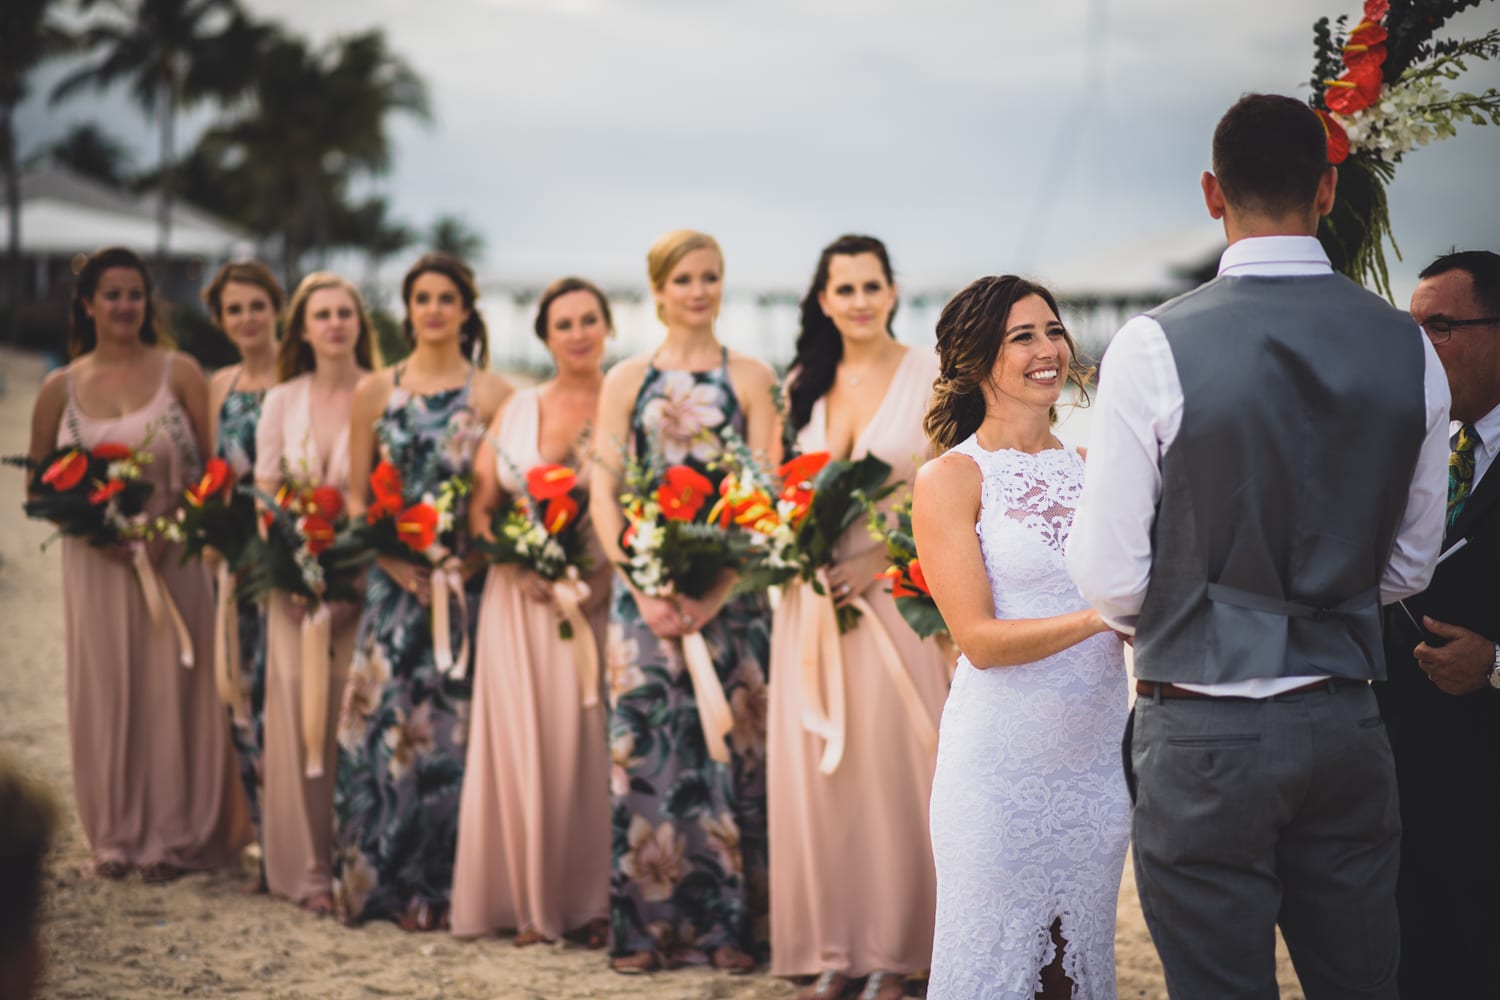 A wedding ceremony on the beach with bridesmaids and groomsmen.